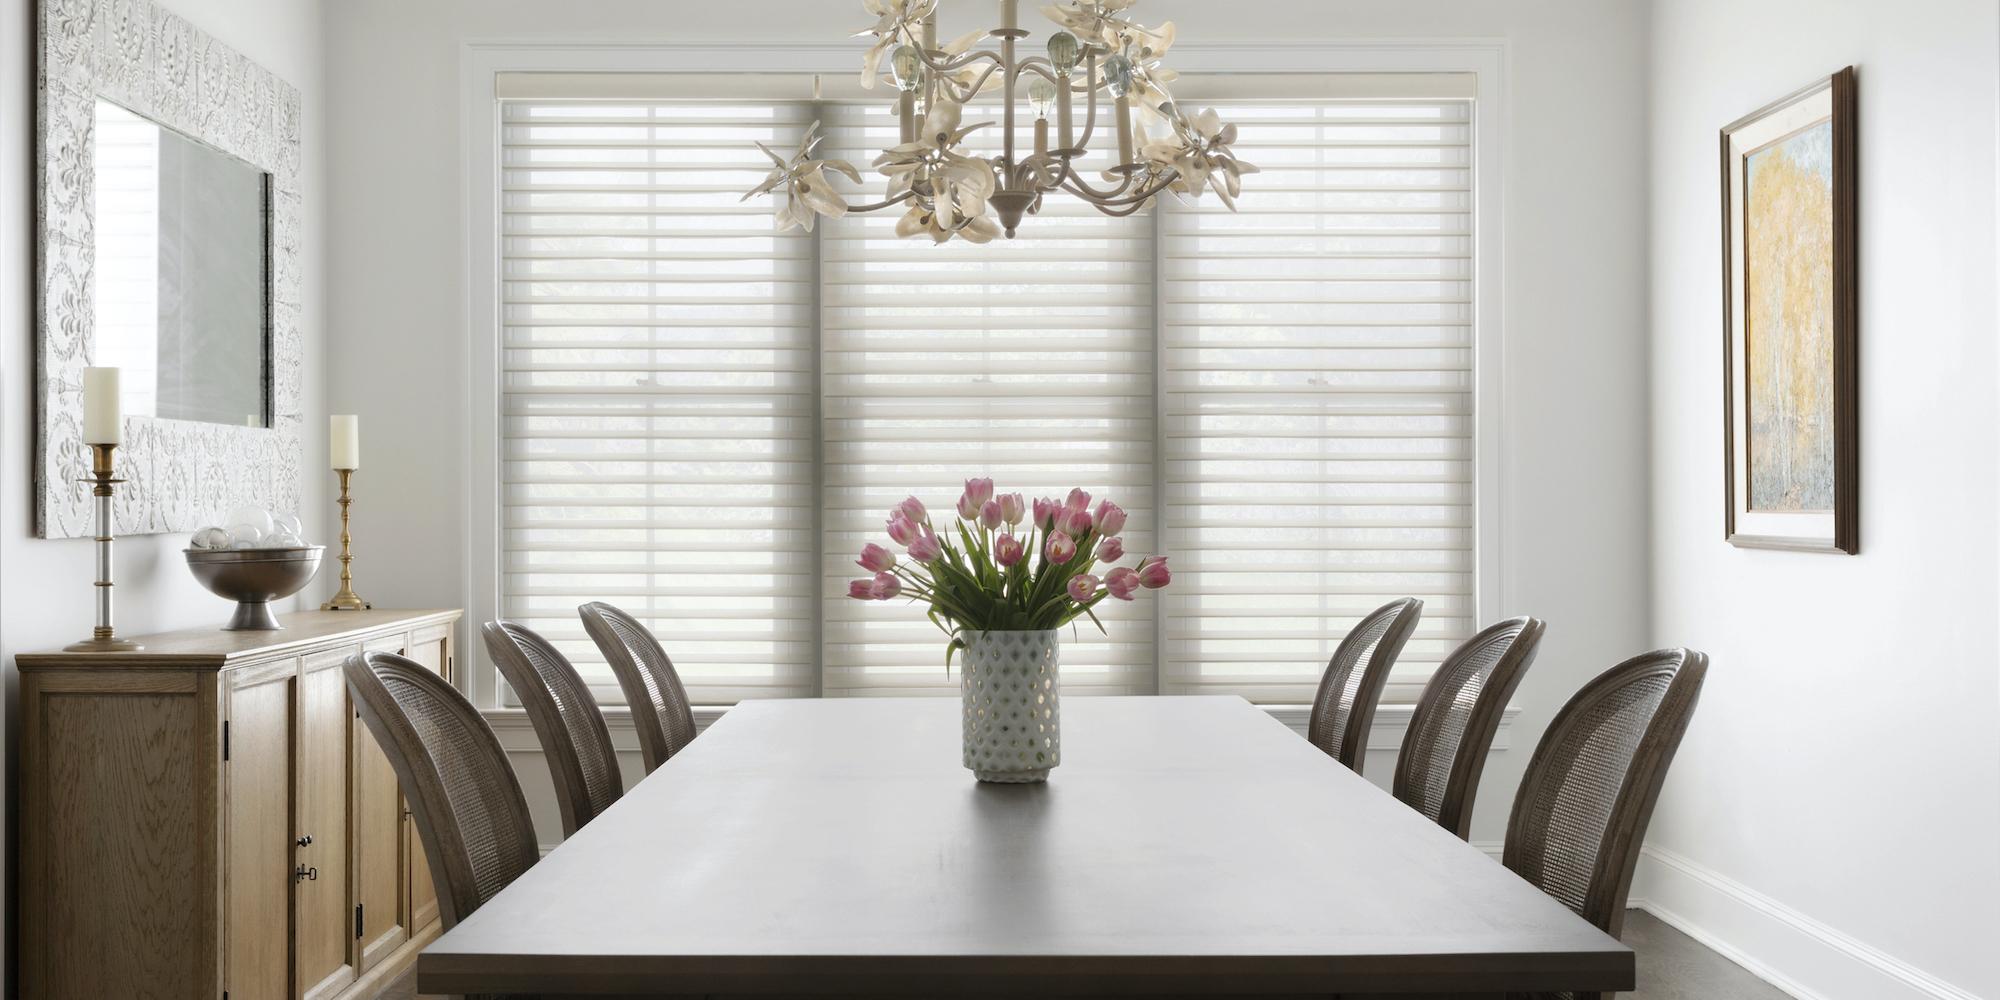 Light pours into a dining room with large windows partially covered with Serenity sheer shades in white